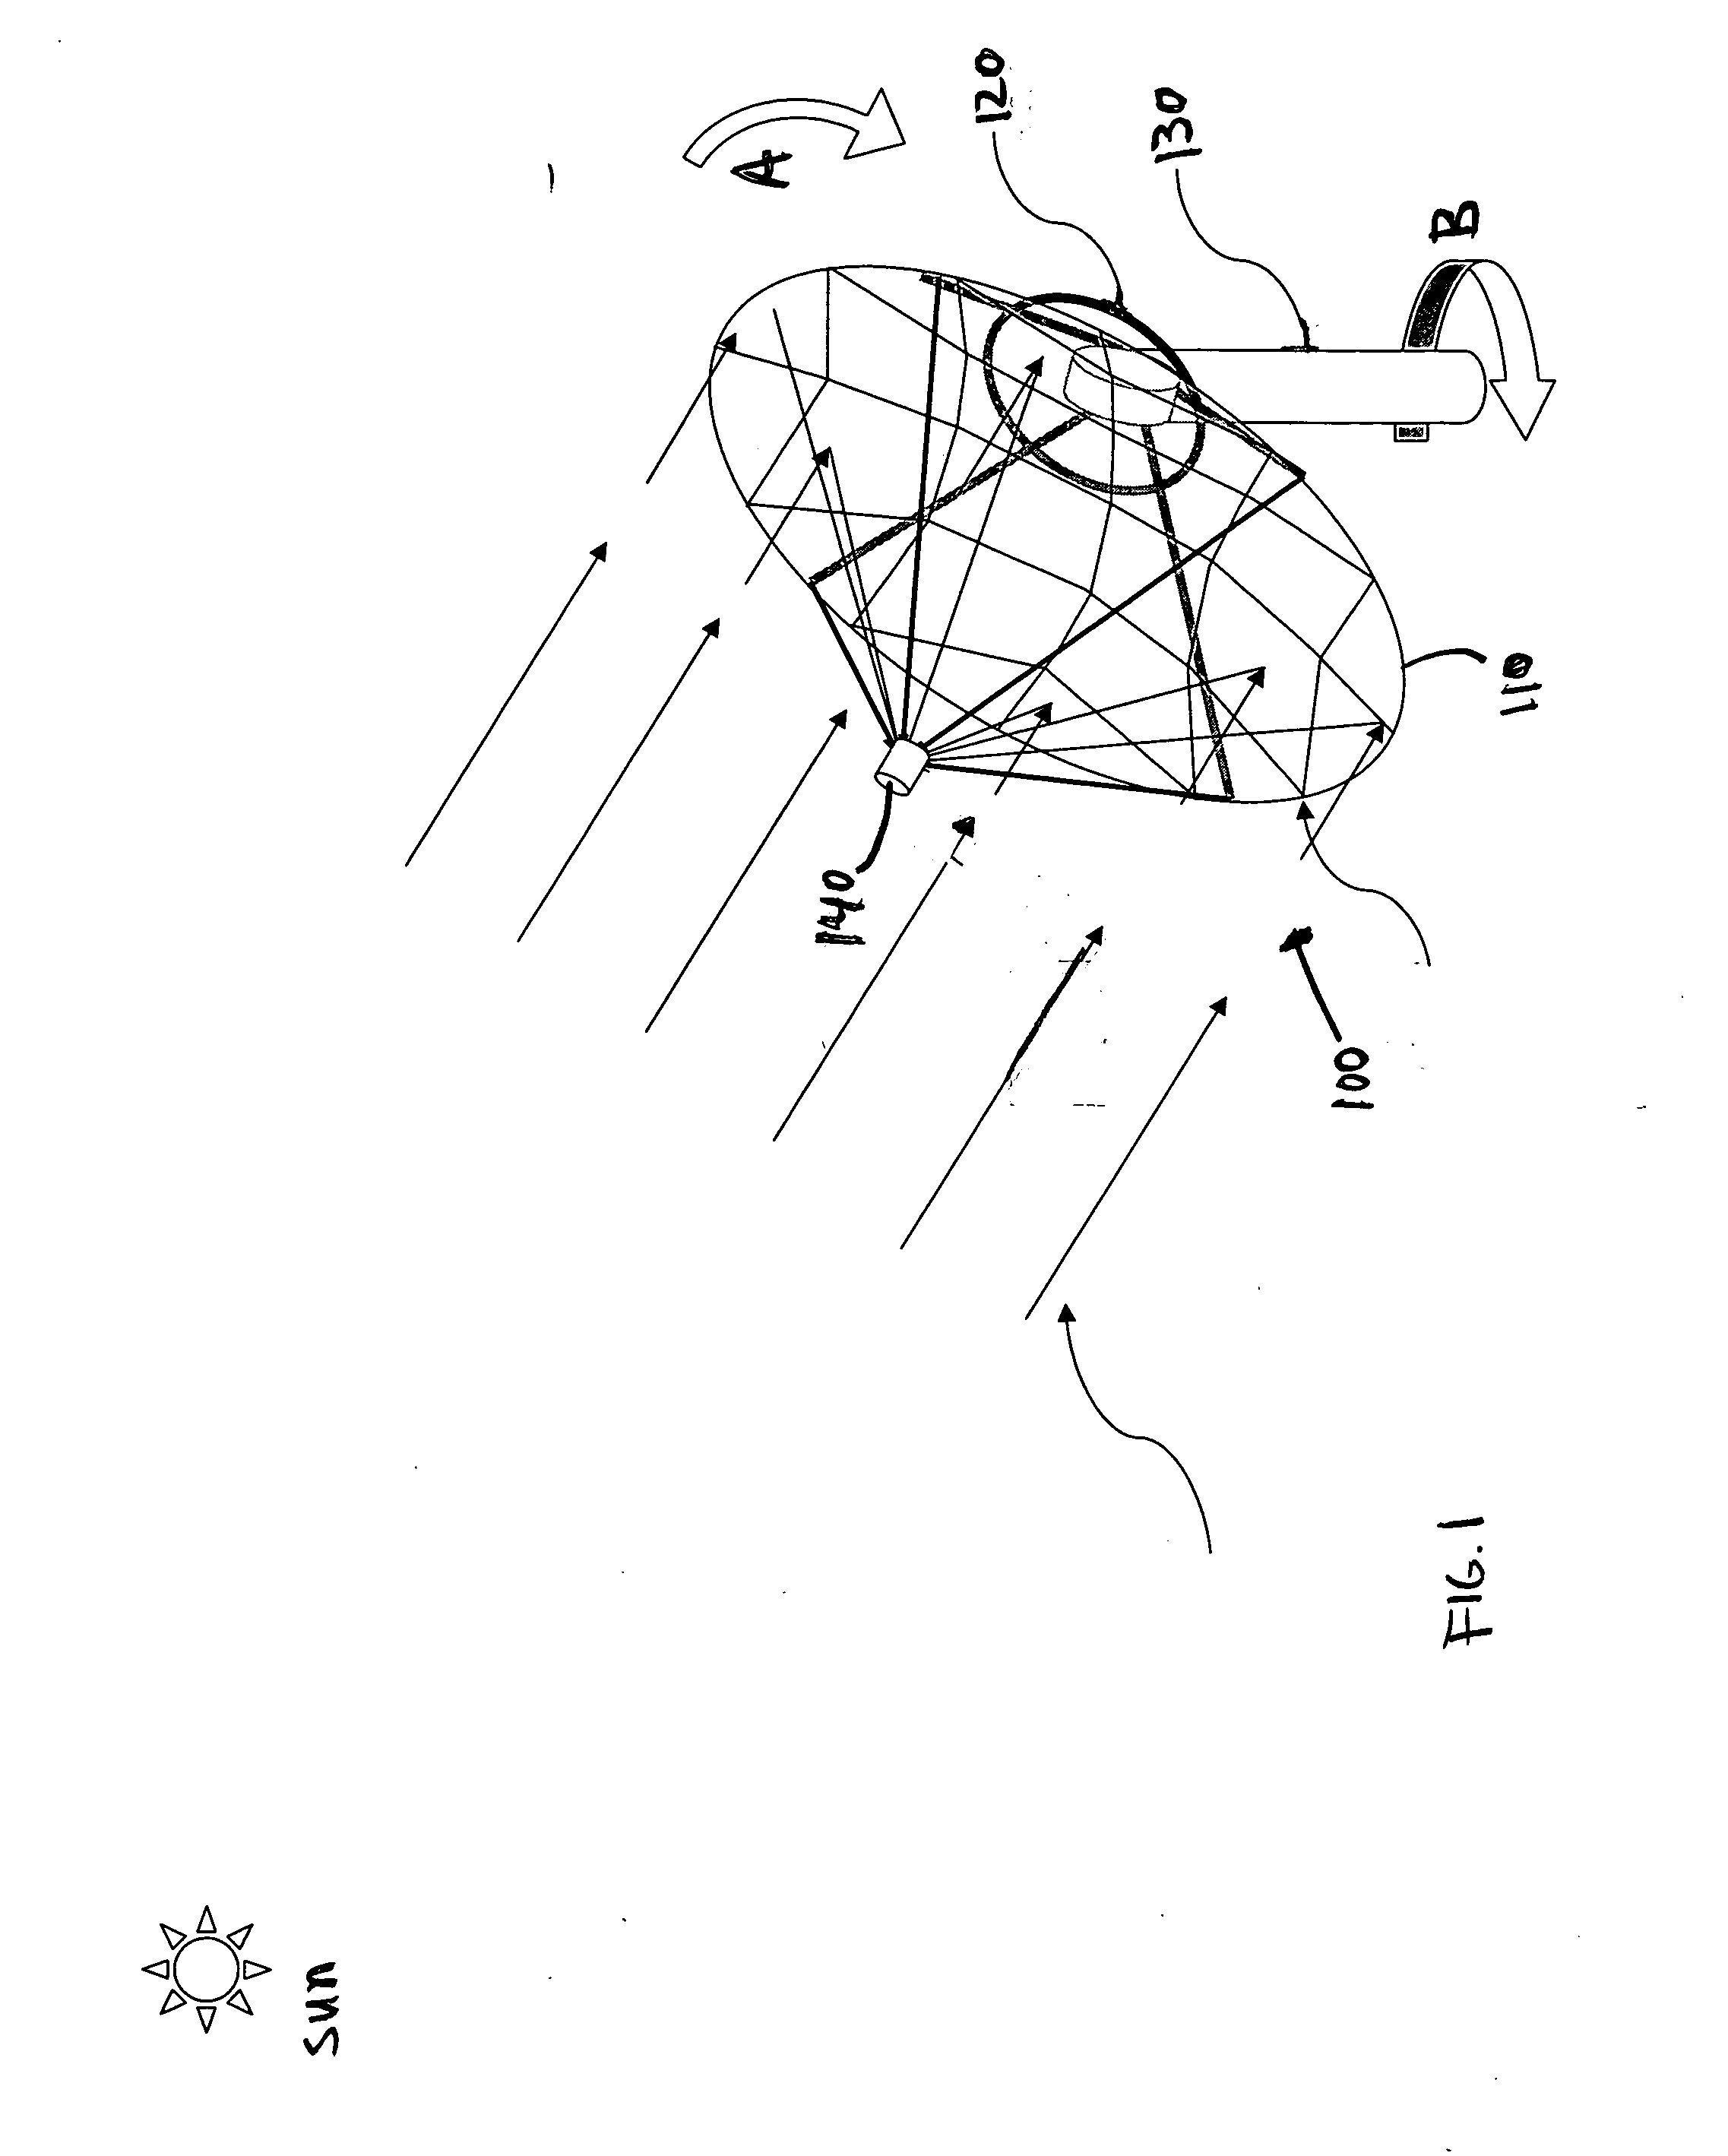 Aligned multiple flat mirror reflector array for concentrating sunlight onto a solar cell